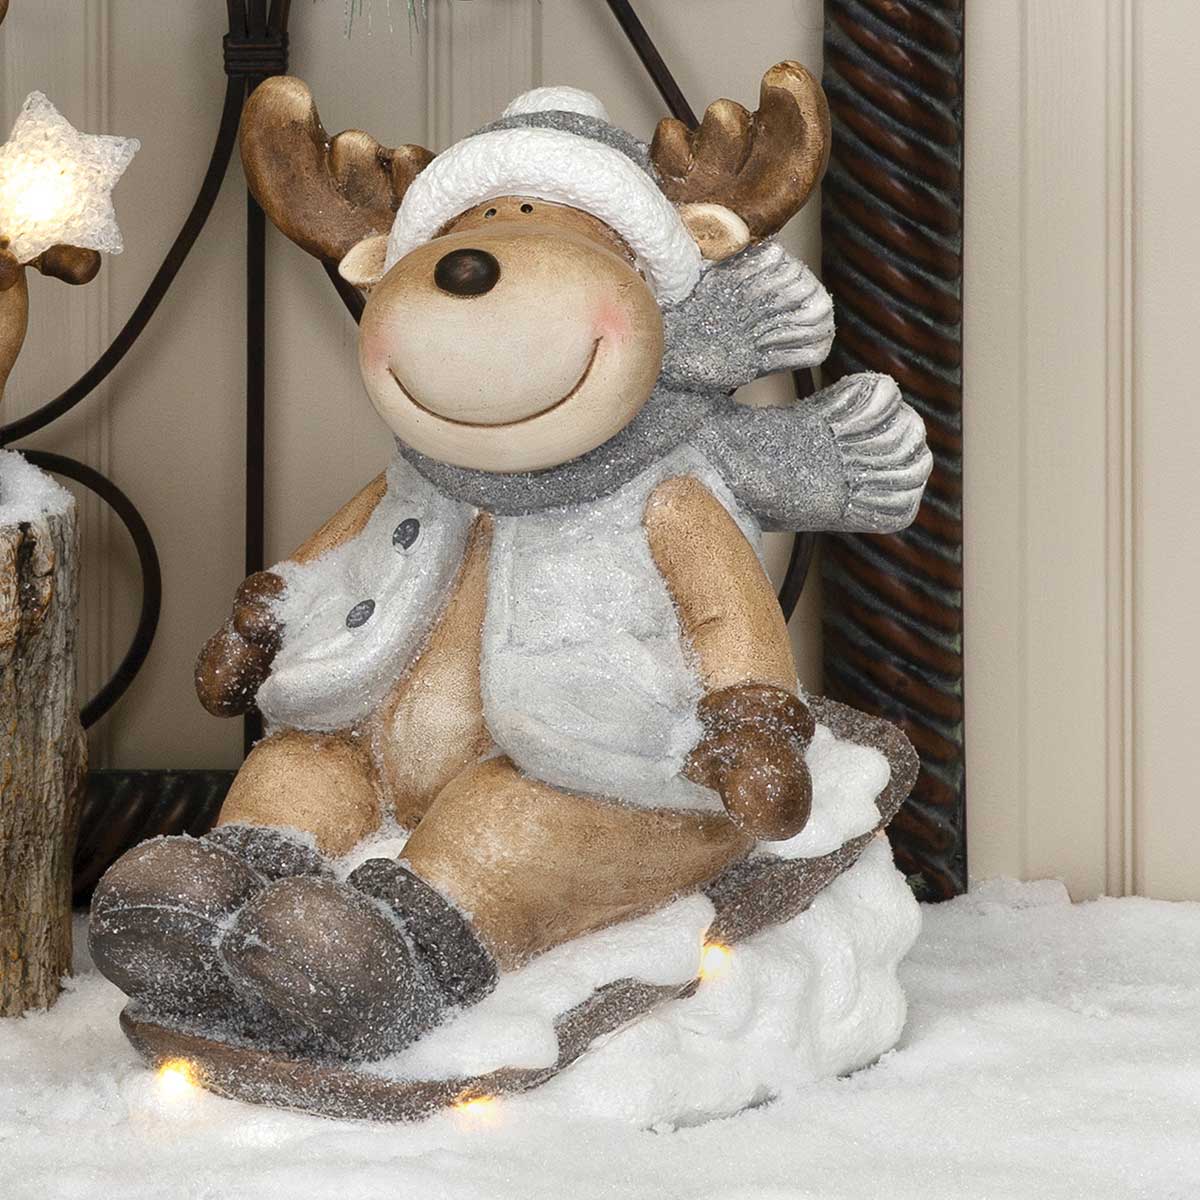 SAMMY SLEDS LARGE RESIN MOOSE ON SLED WITH GLITTER, SNOW